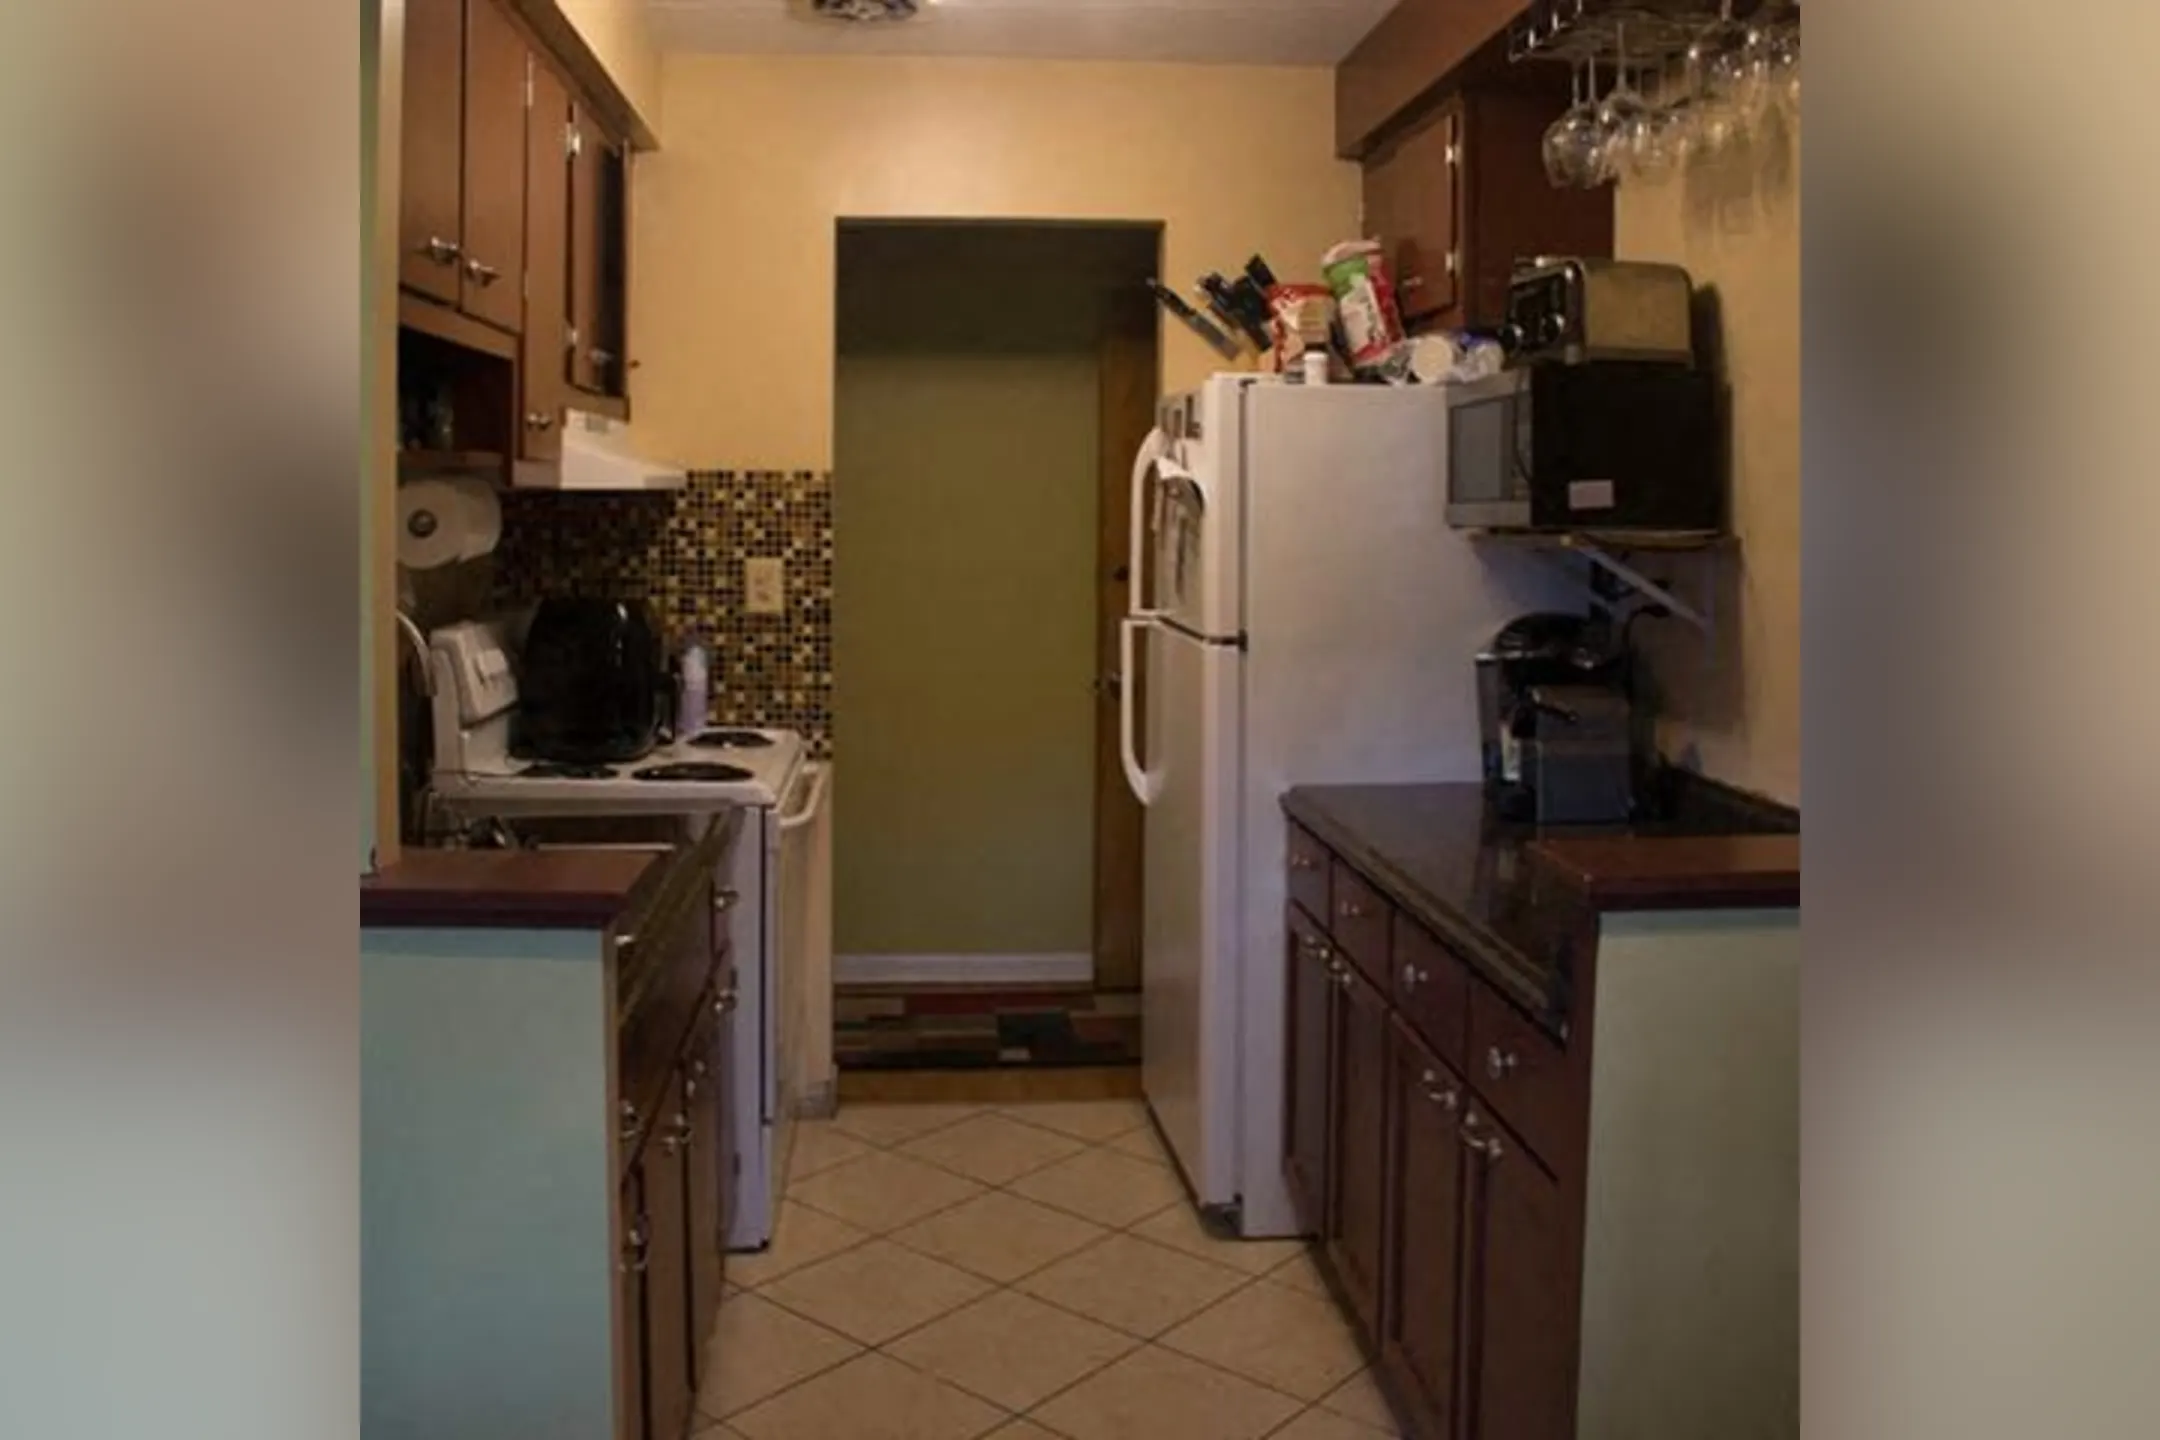 Kitchen - Emerald Village Apartments - Willoughby, OH